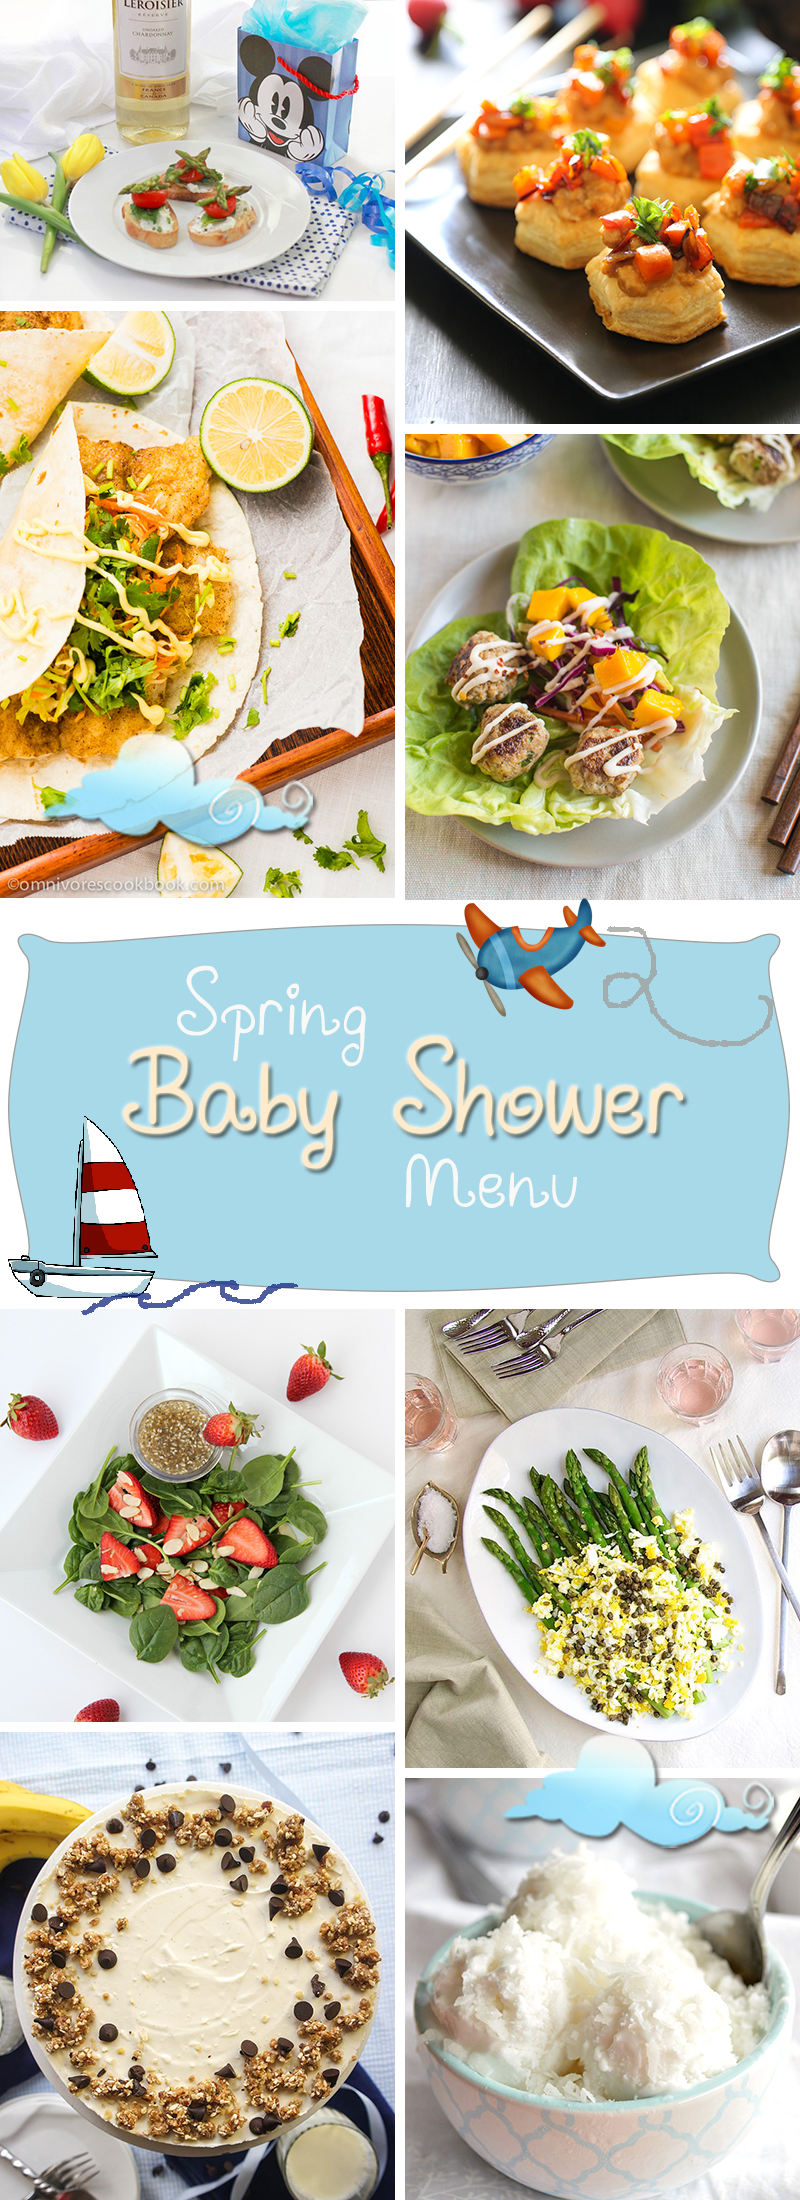 Healthy Baby Shower menu with salads, mains and desserts.